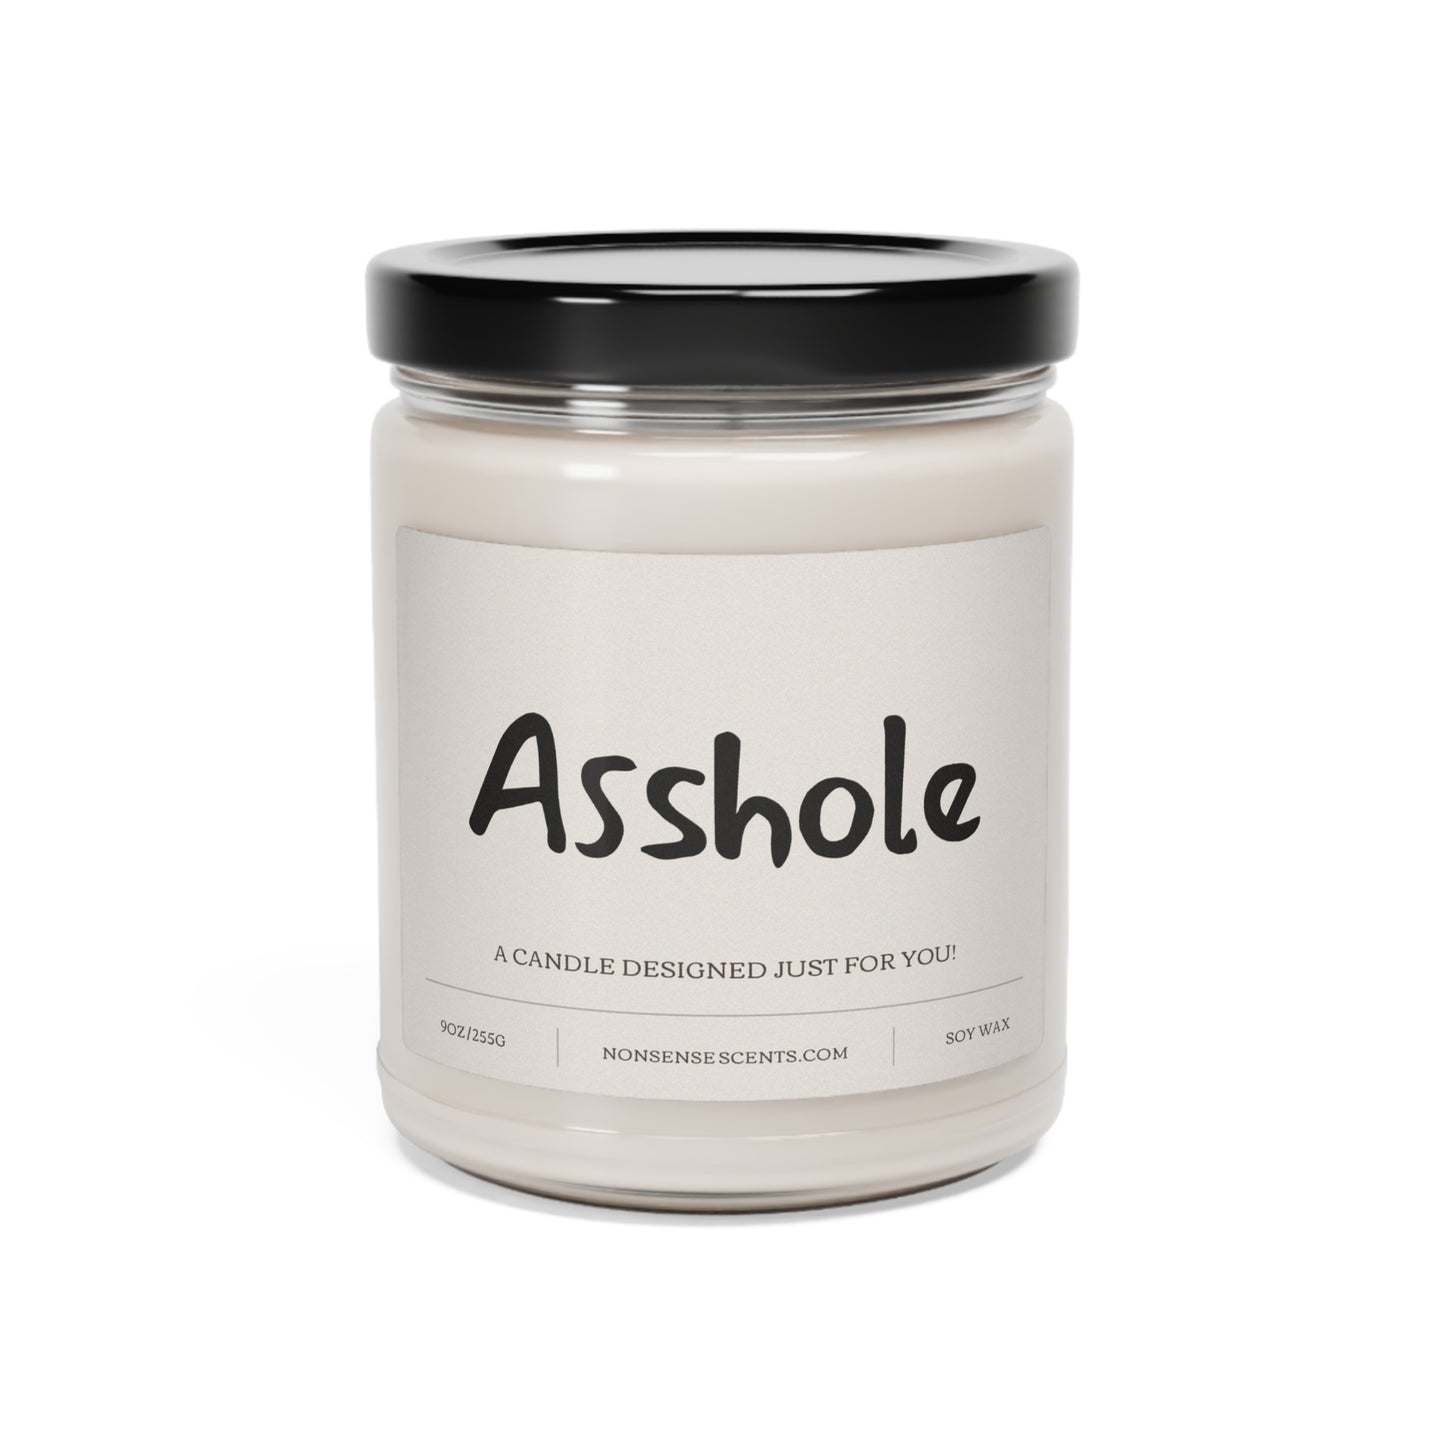 "Asshole" Scented Candle